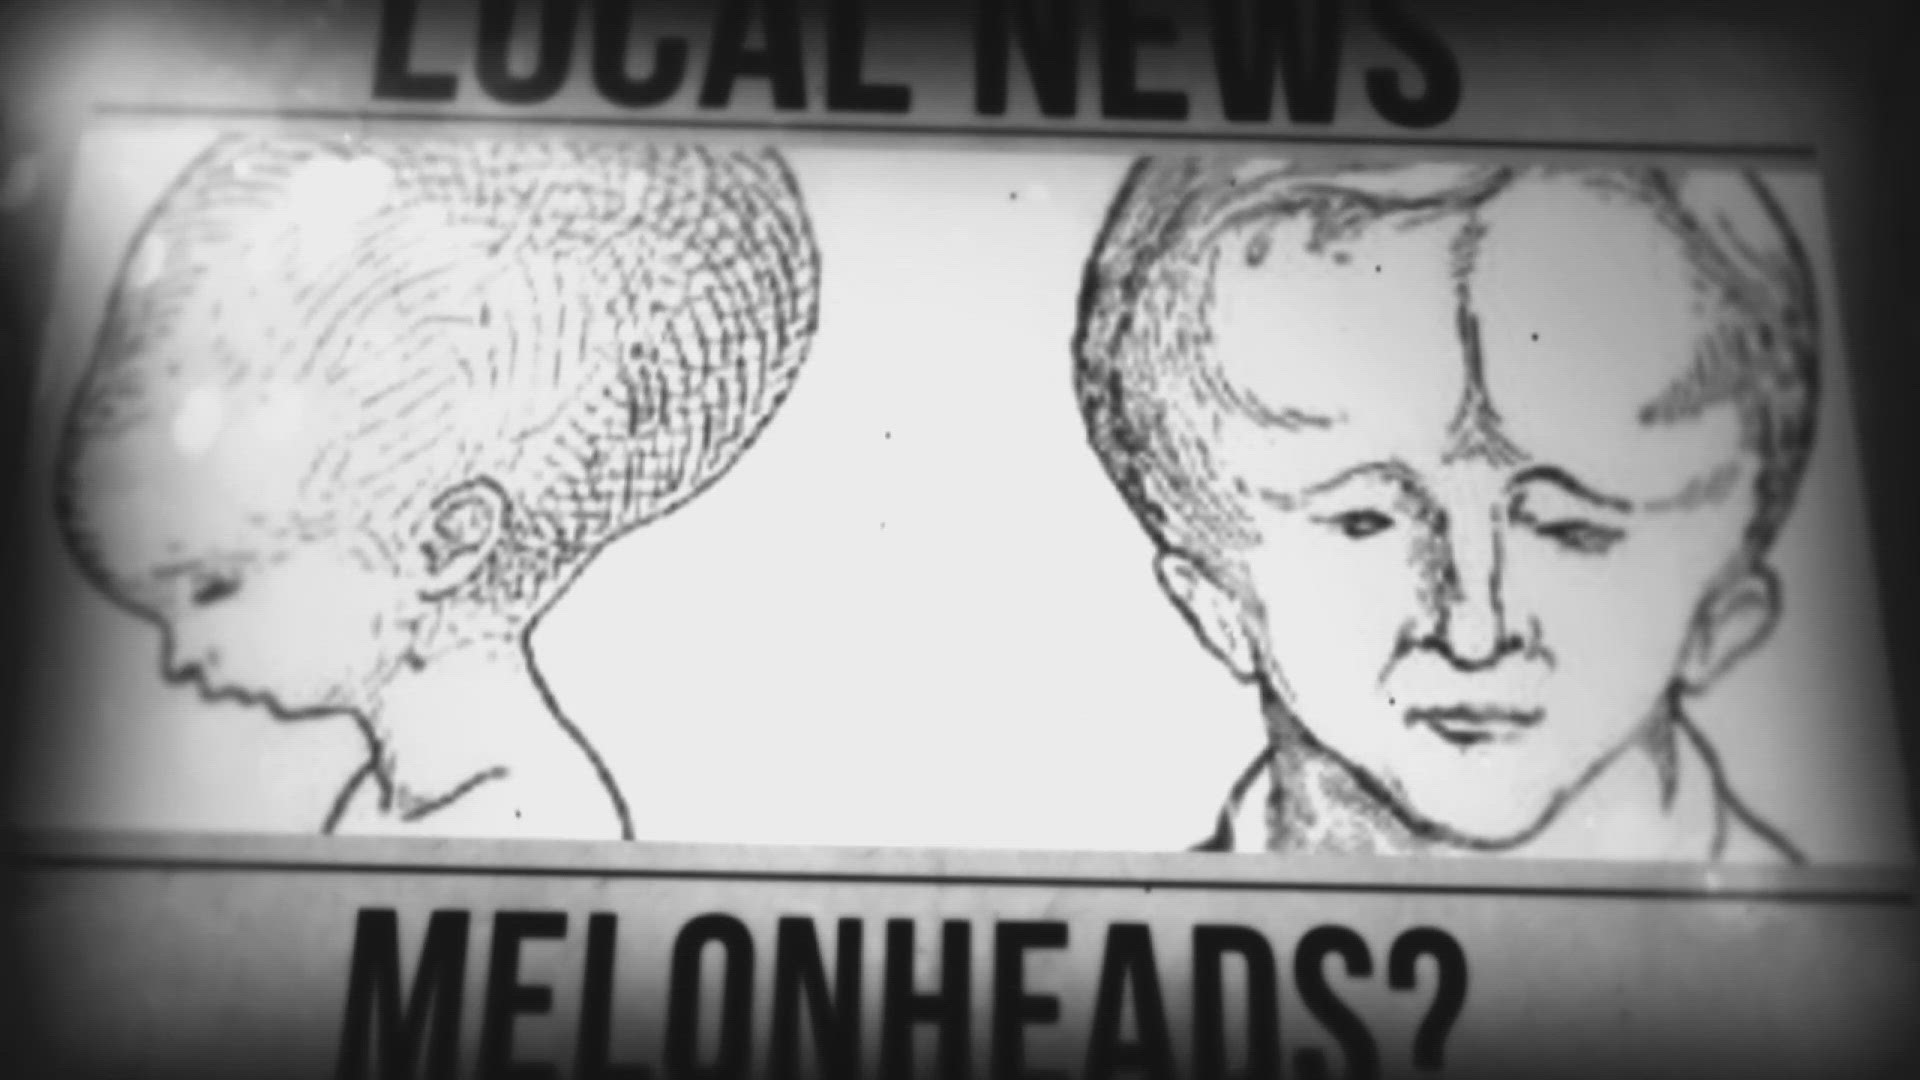 "Melon Heads: House of Crow" filmmaker Eddie Lengyel has been creating creepy, campy cinema right here in Northeast Ohio since 2005.